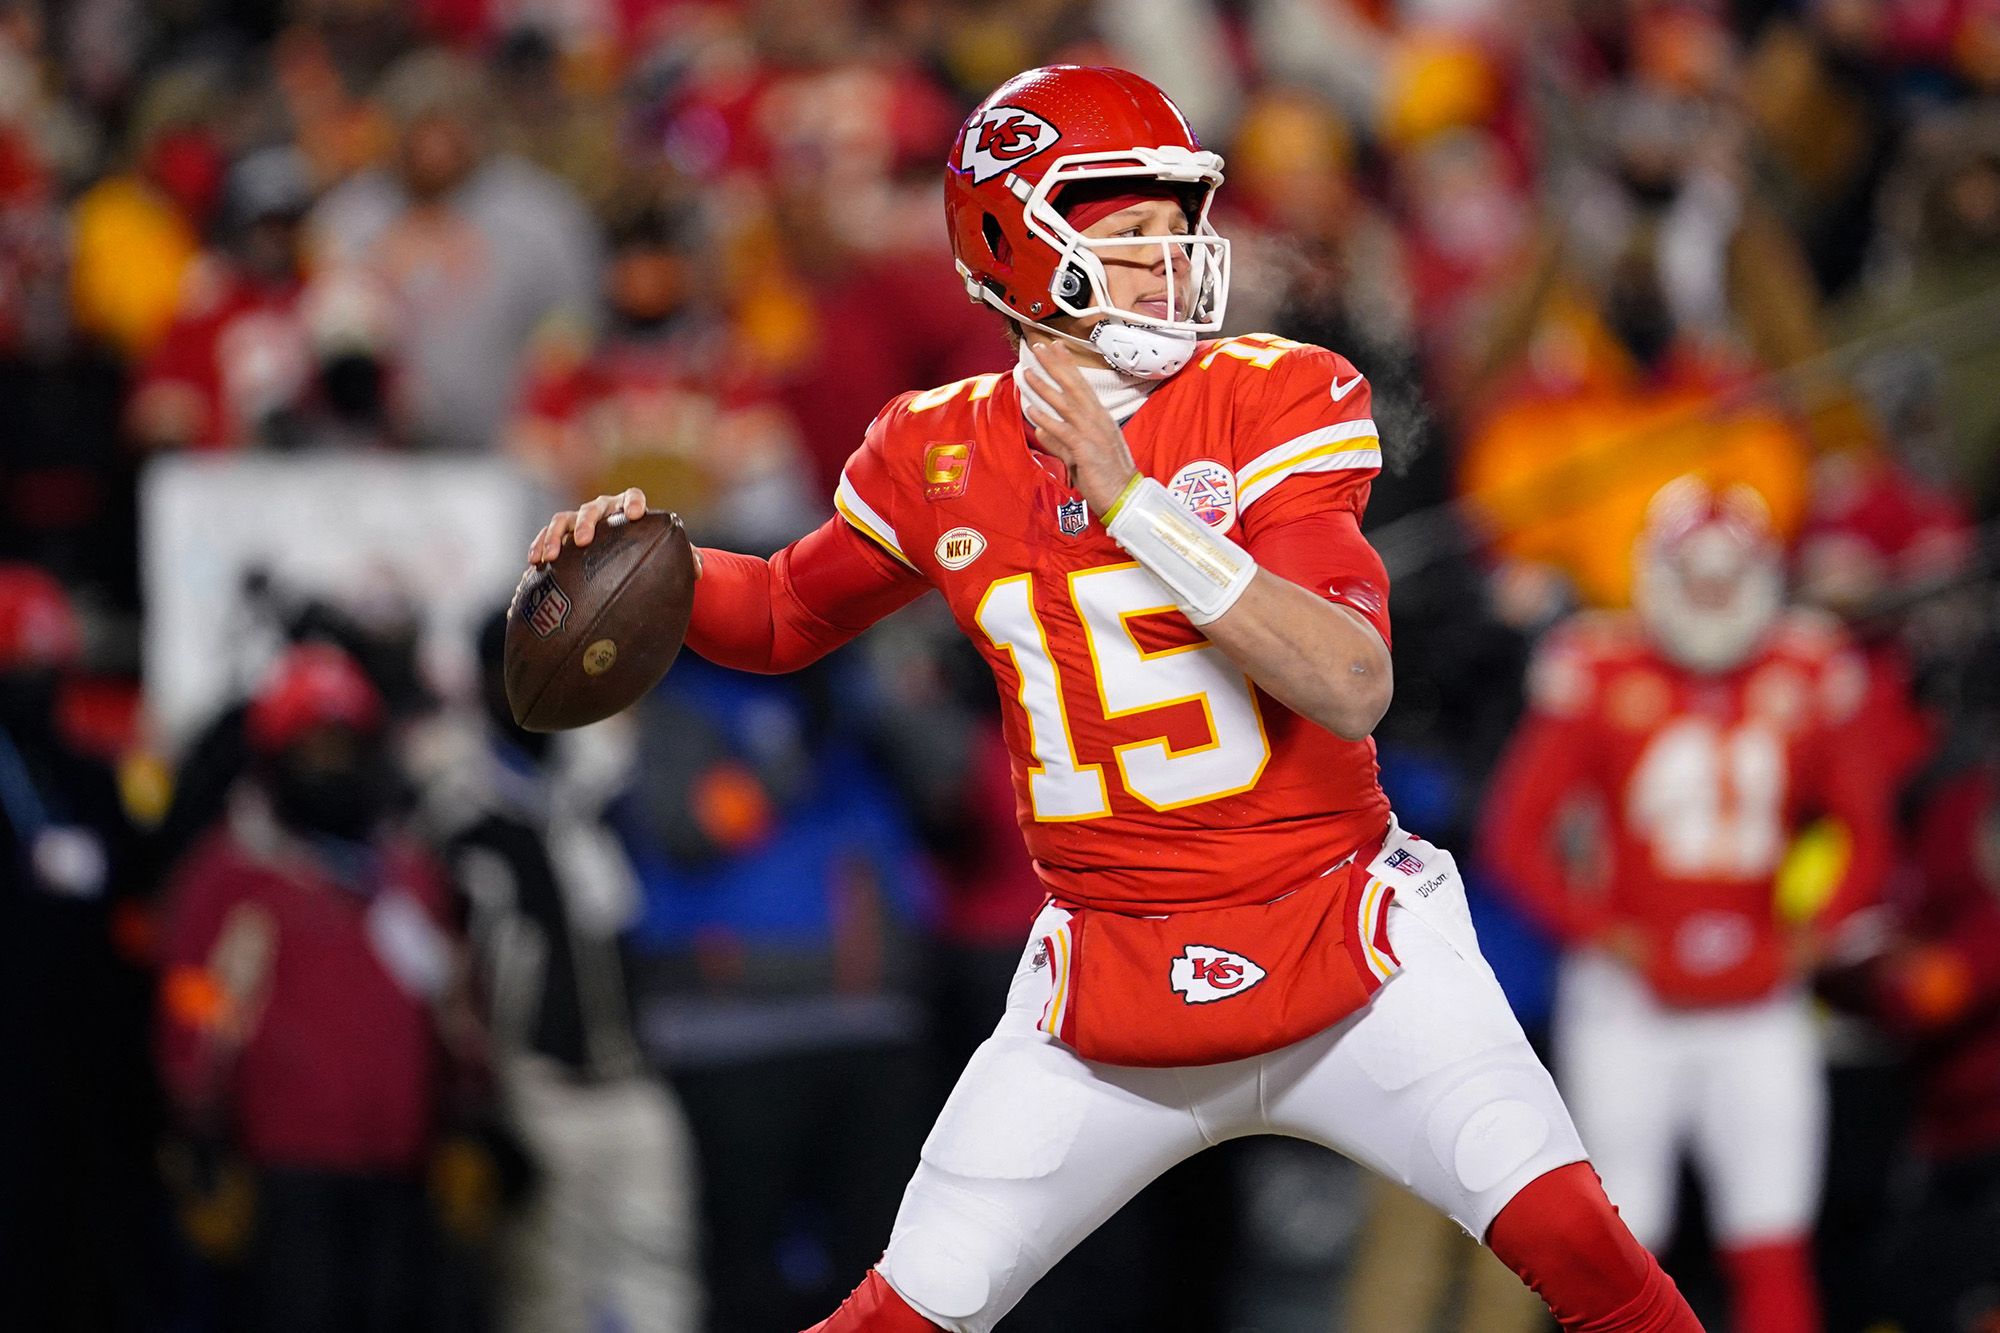 Campaign launched to move Kansas City Chiefs to Kansas